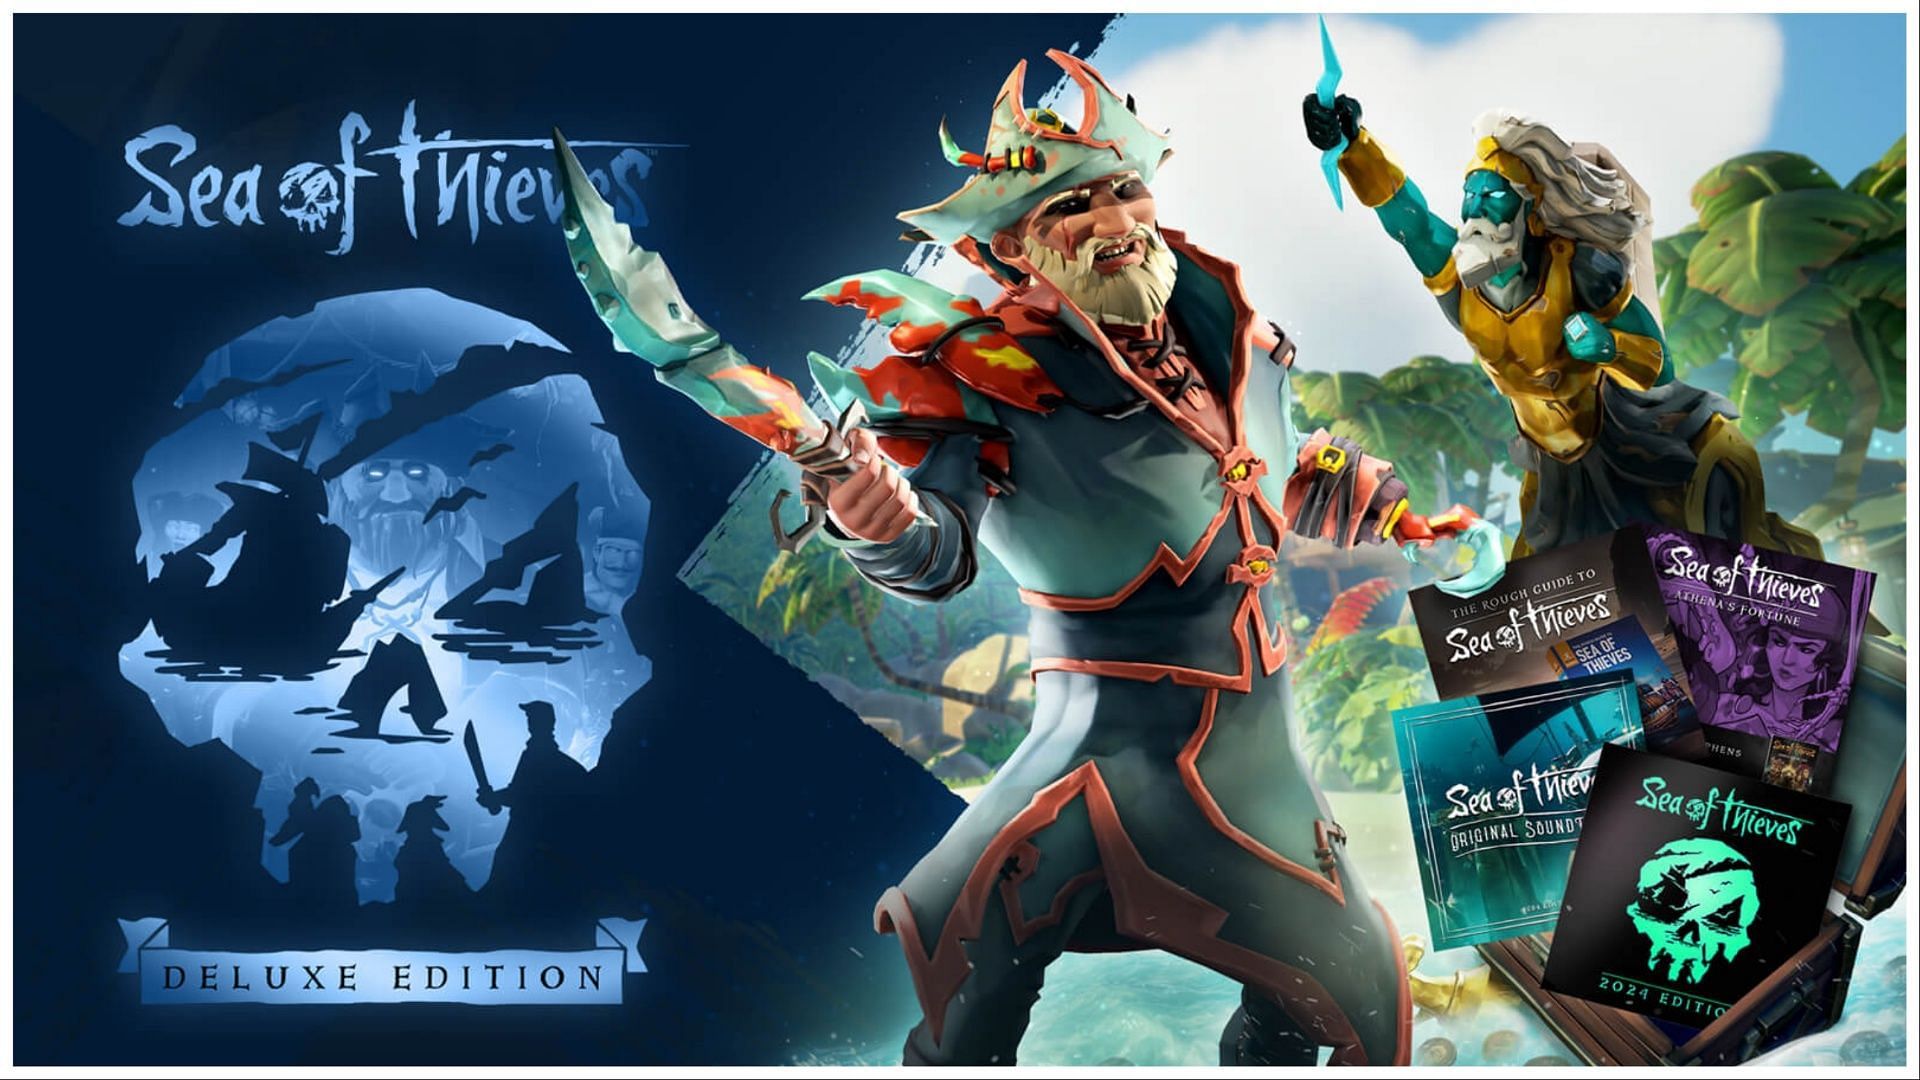 Sea of Thieves Deluxe Edition cover.